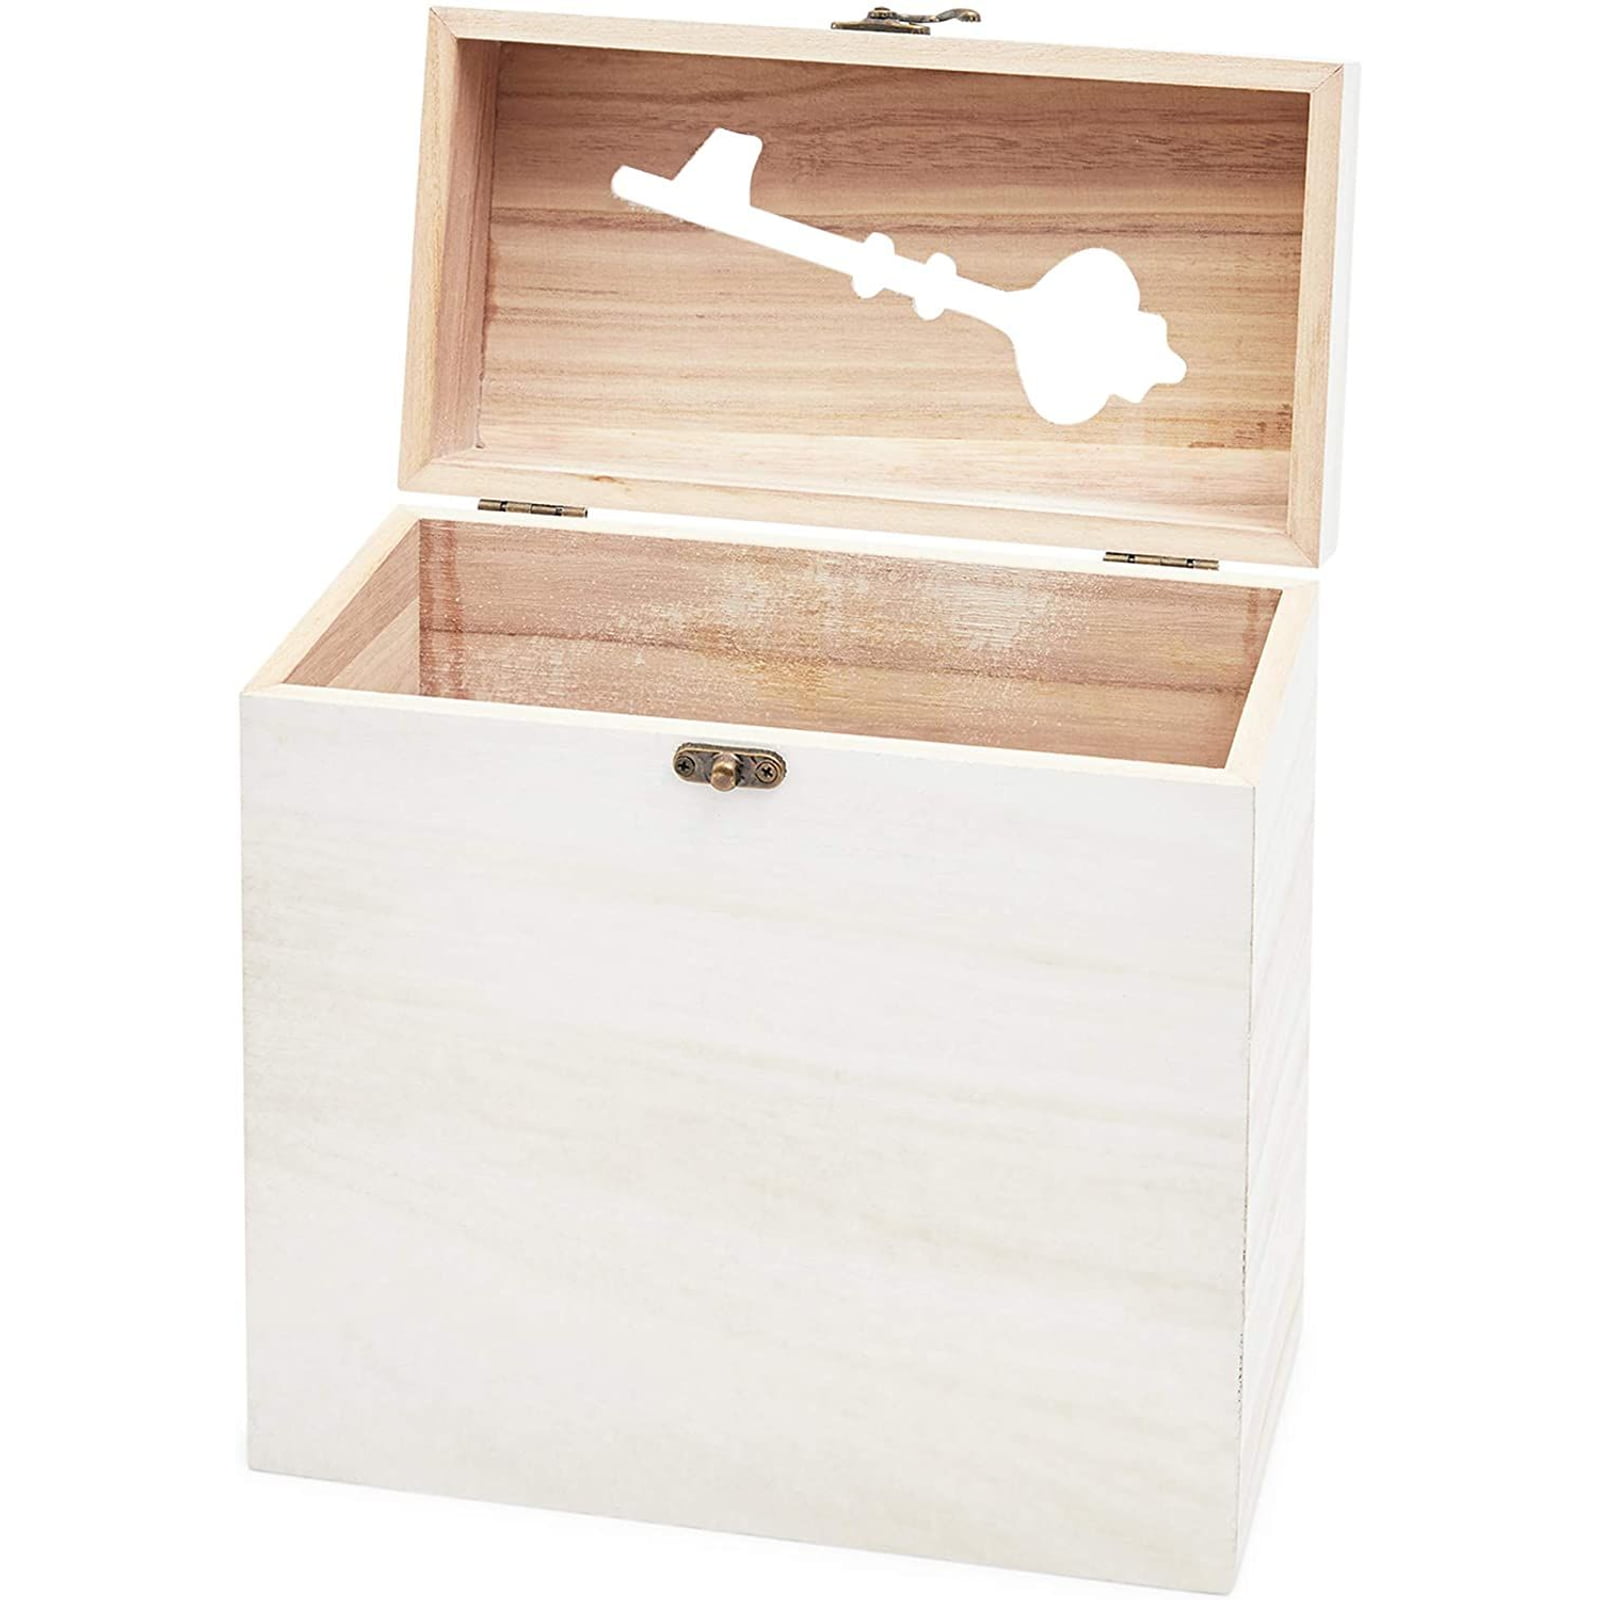 Mr&Mrs Wedding Card Post Wooden Box Collection Craft Gift Lockable Cube Case Lid 